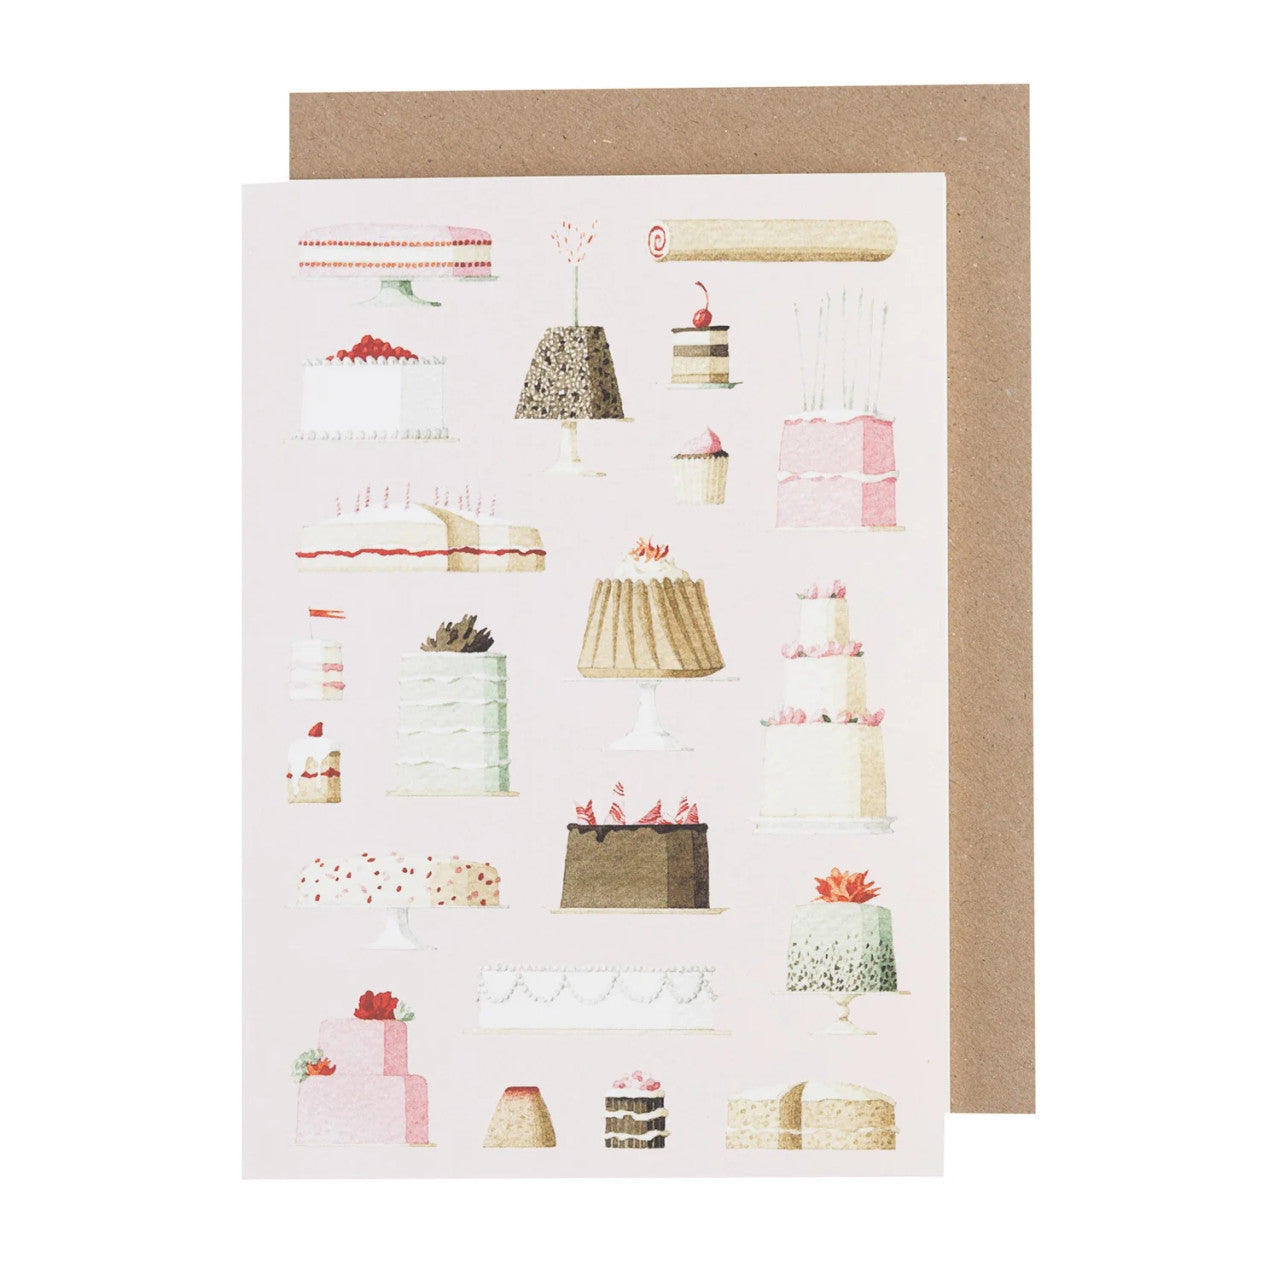 Cakes Blank Greetings Card by Laura Stoddart. Made in England